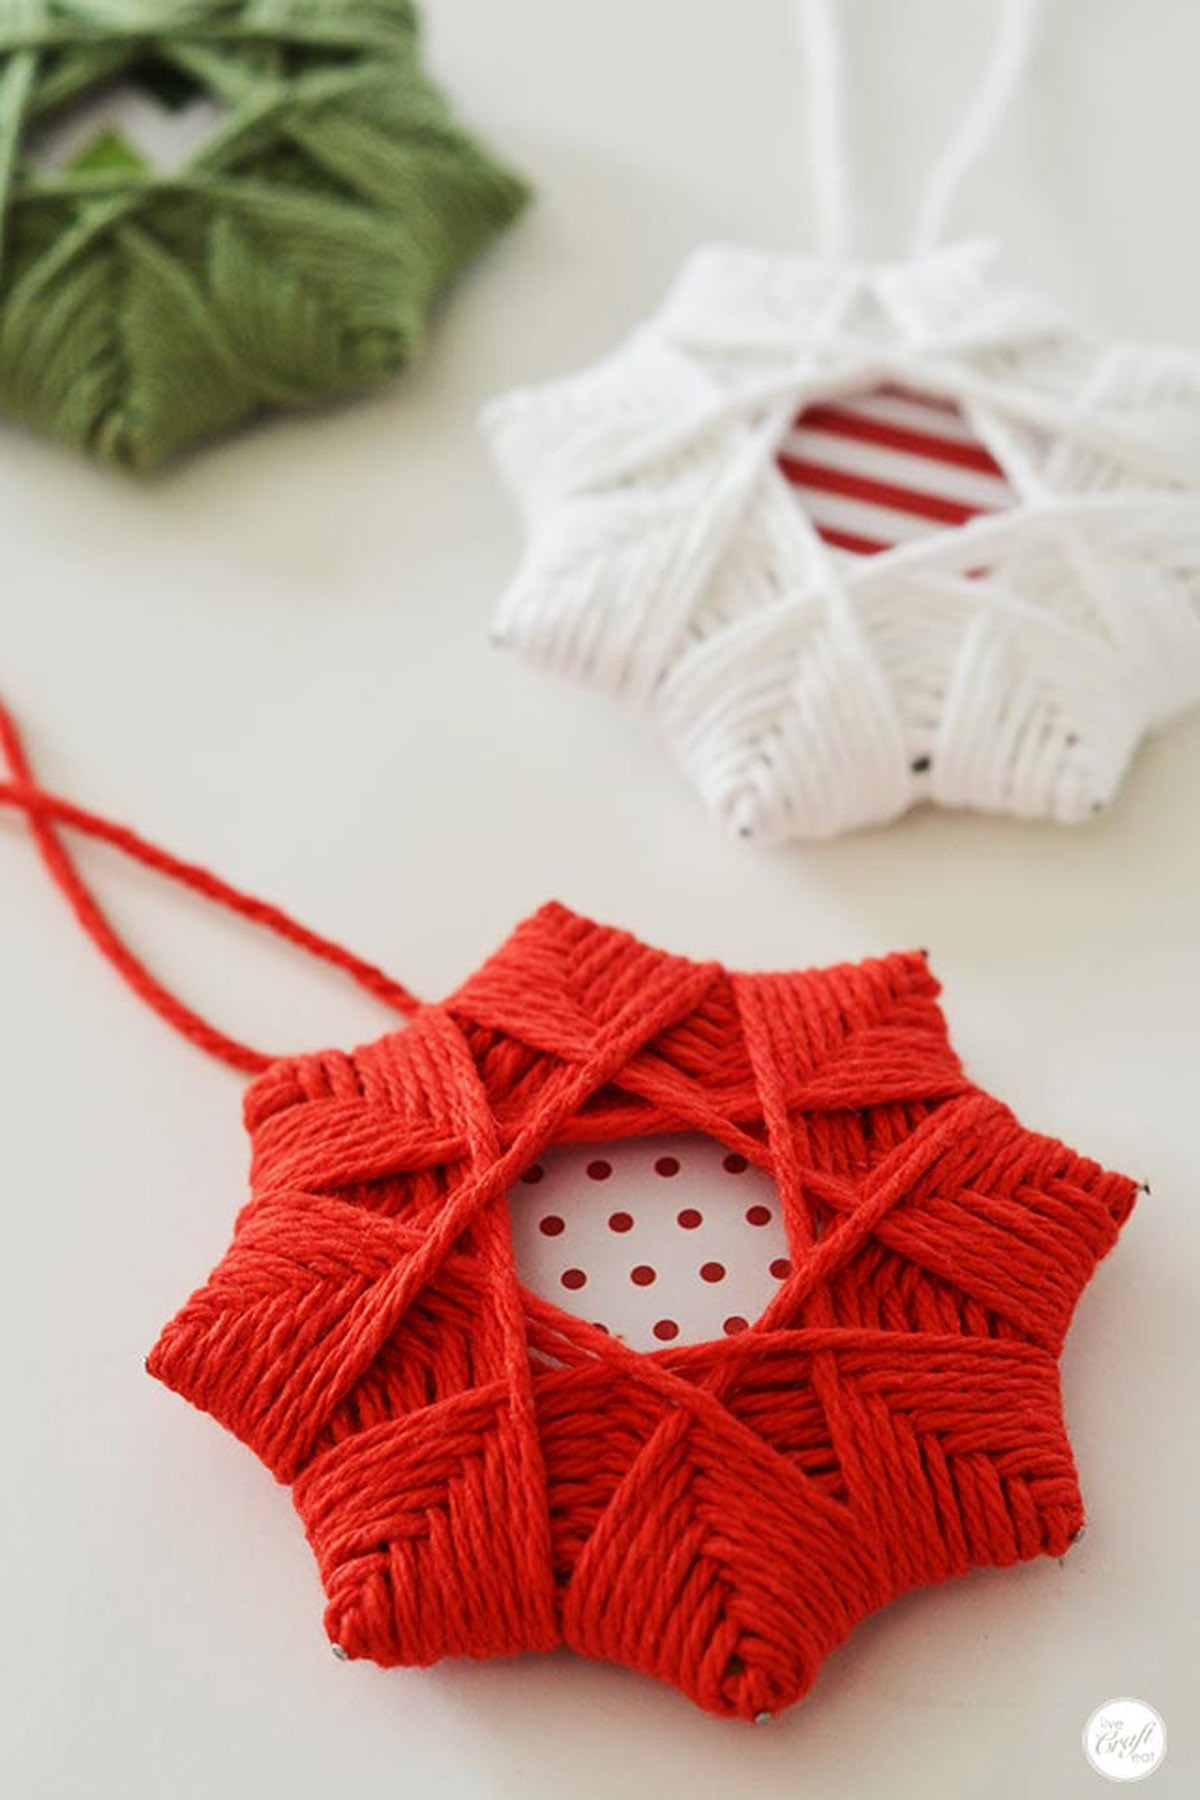 Yarn Craft Ideas For Adults
 29 Homemade DIY Christmas Ornament Craft Ideas How To